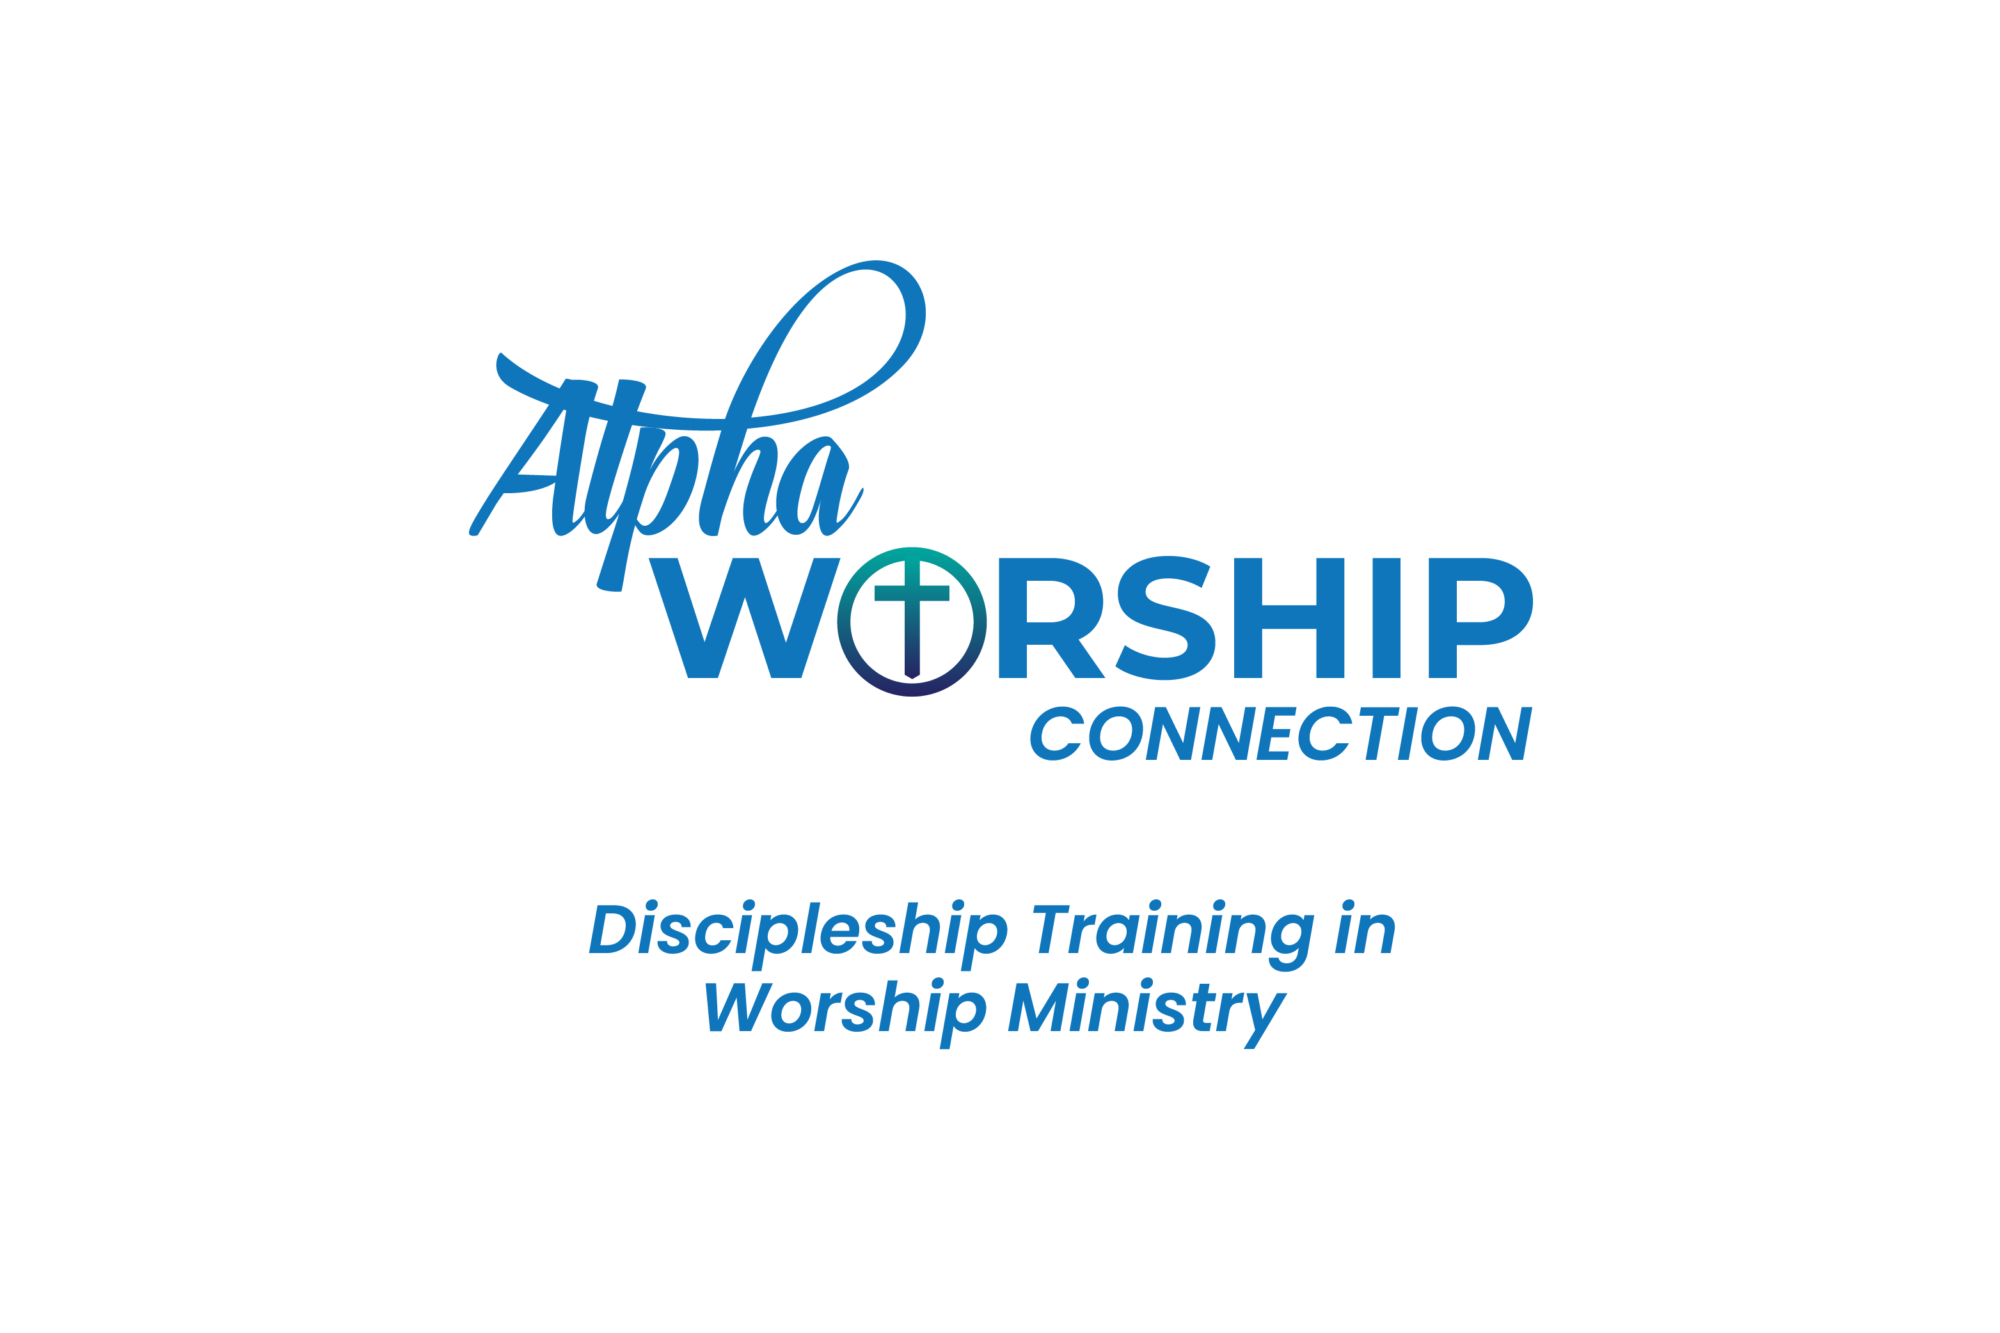 ALPHA WORSHIP CONNECTION, a ministry dedicated to Equipping local